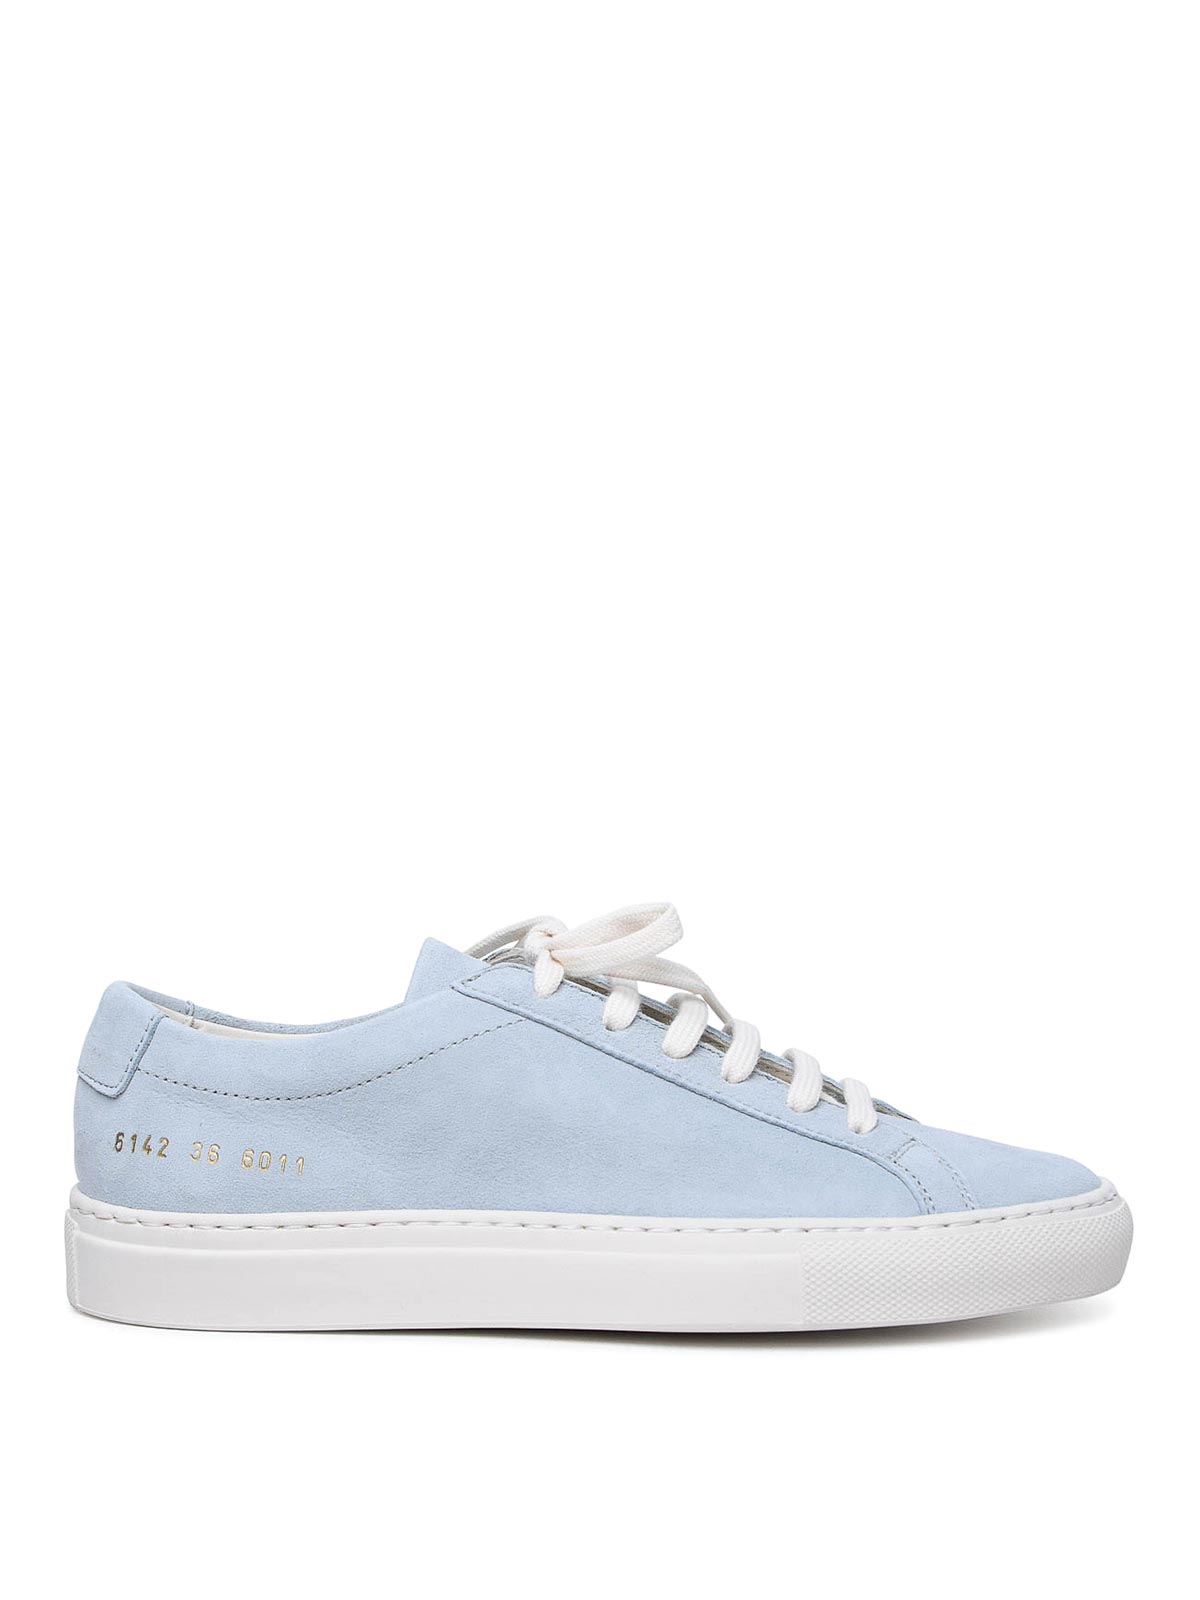 Common Projects Achilles Suede Sneakers In Blue